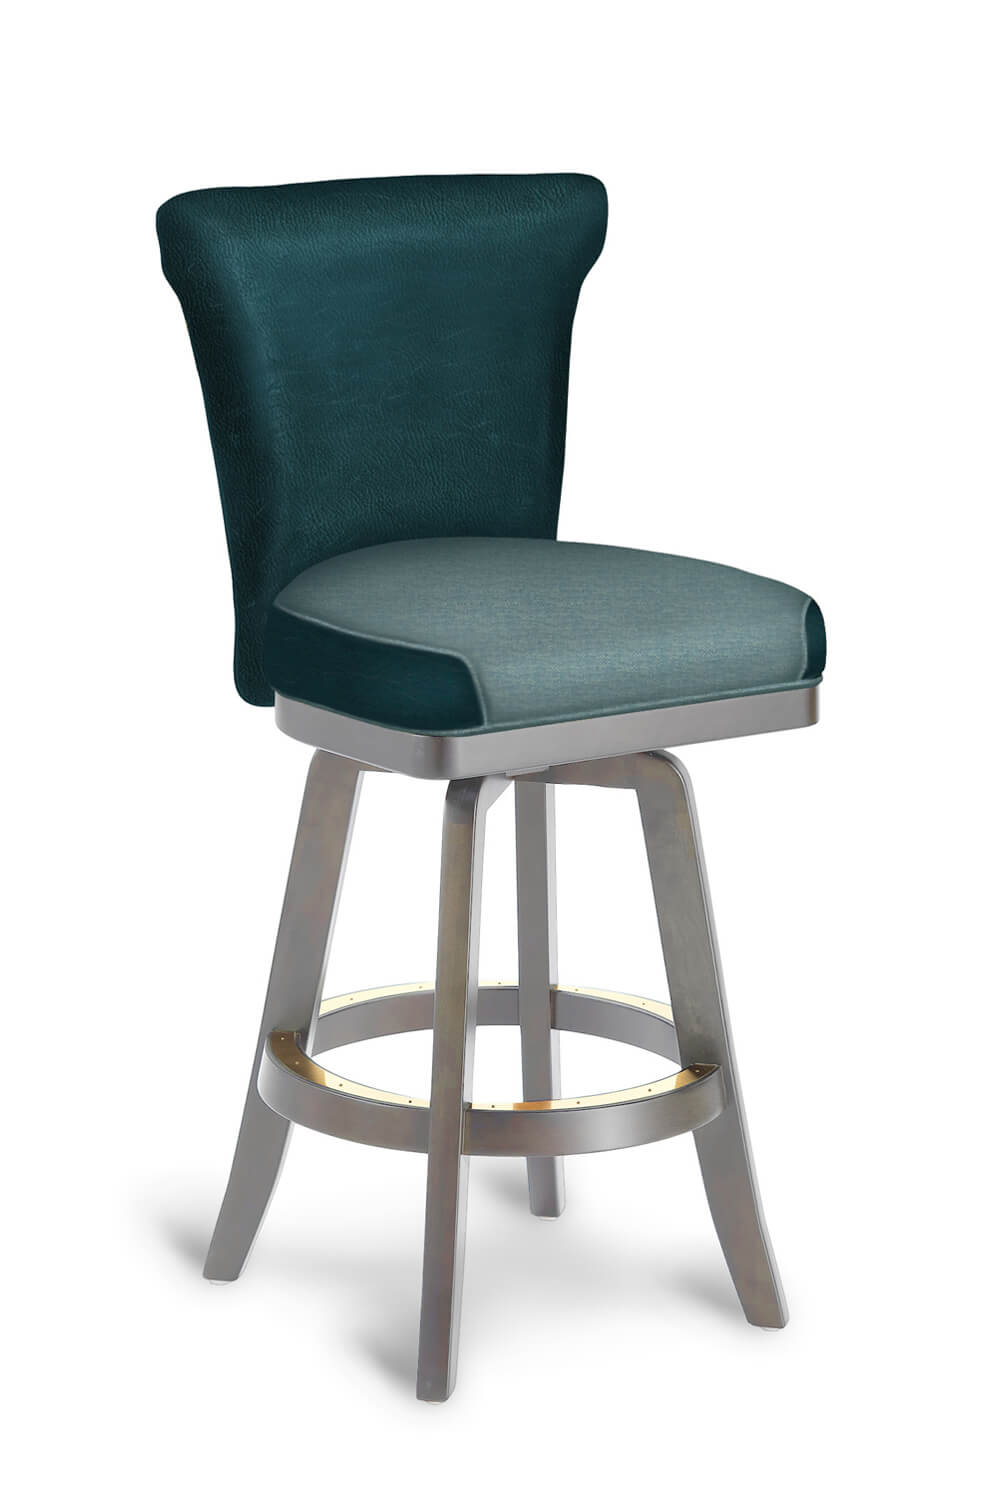 Dara Upholstered Wood Swivel Stool, Teal Leather Bar Chairs